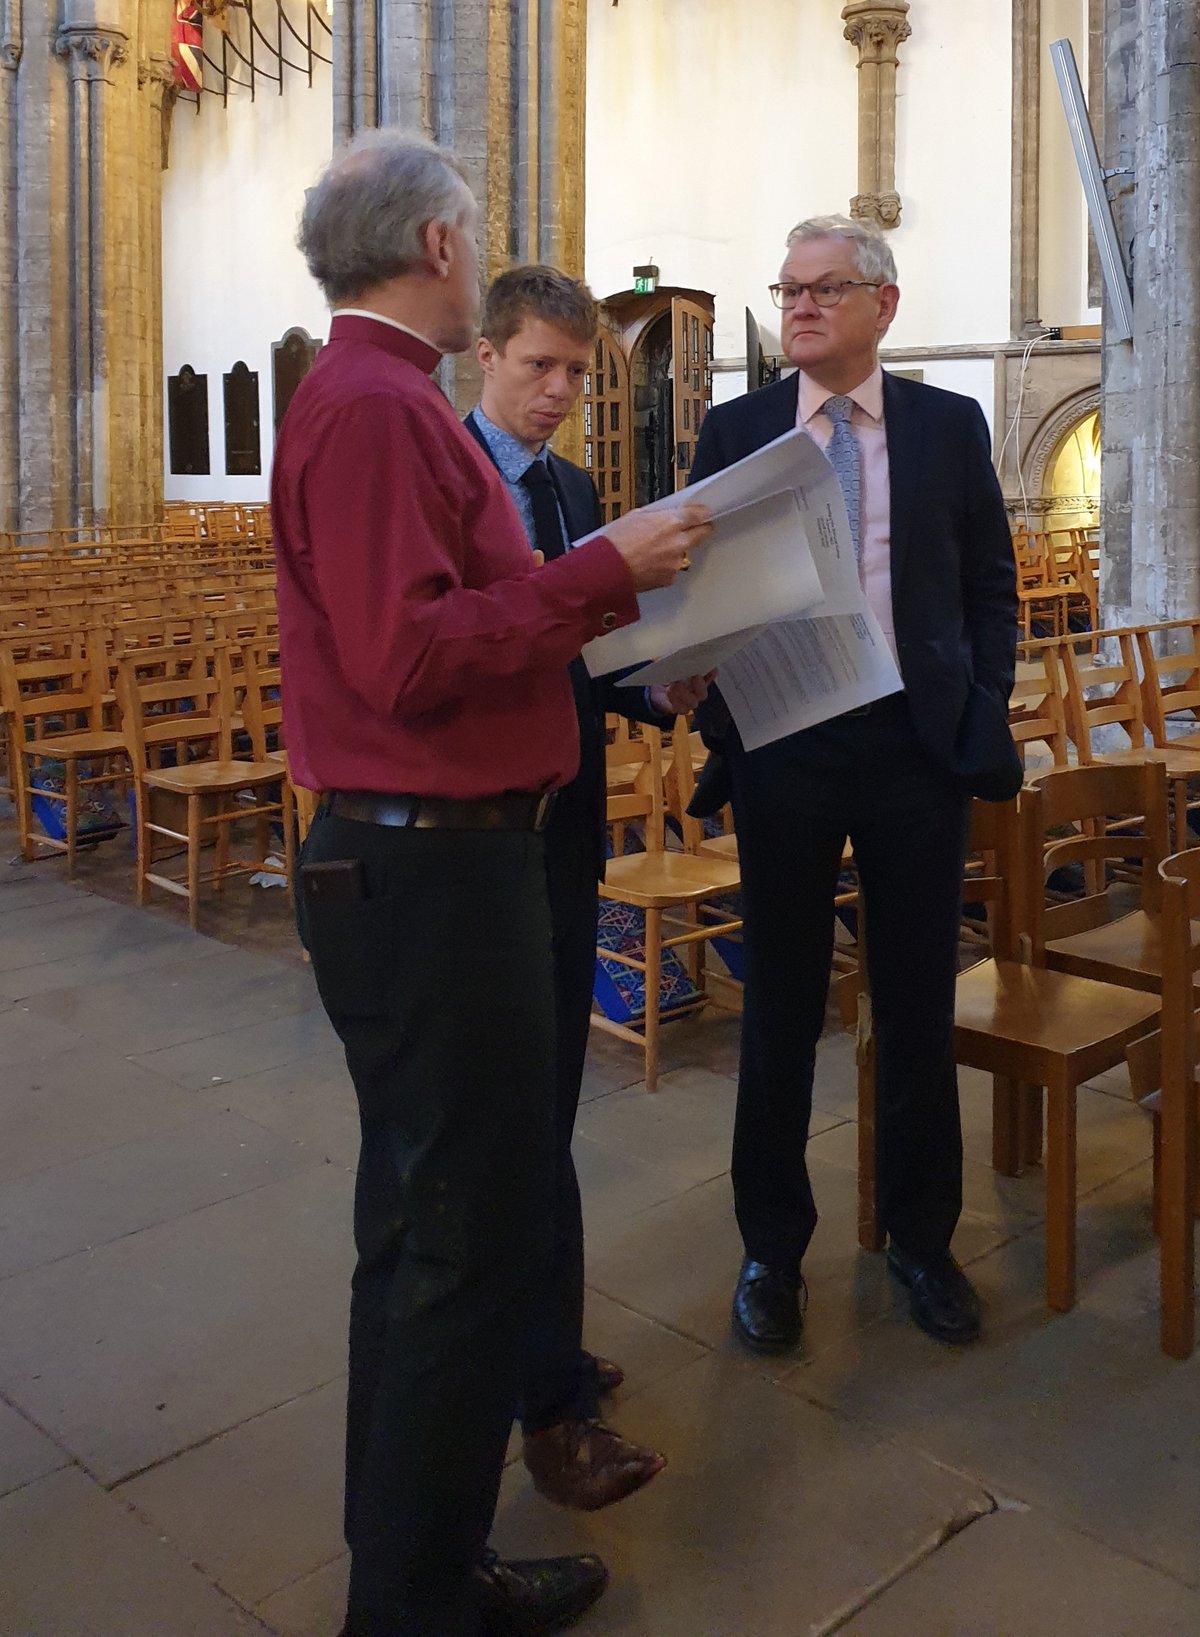 Archbishop of Wales in Llandaff Cathedral chatting to two men